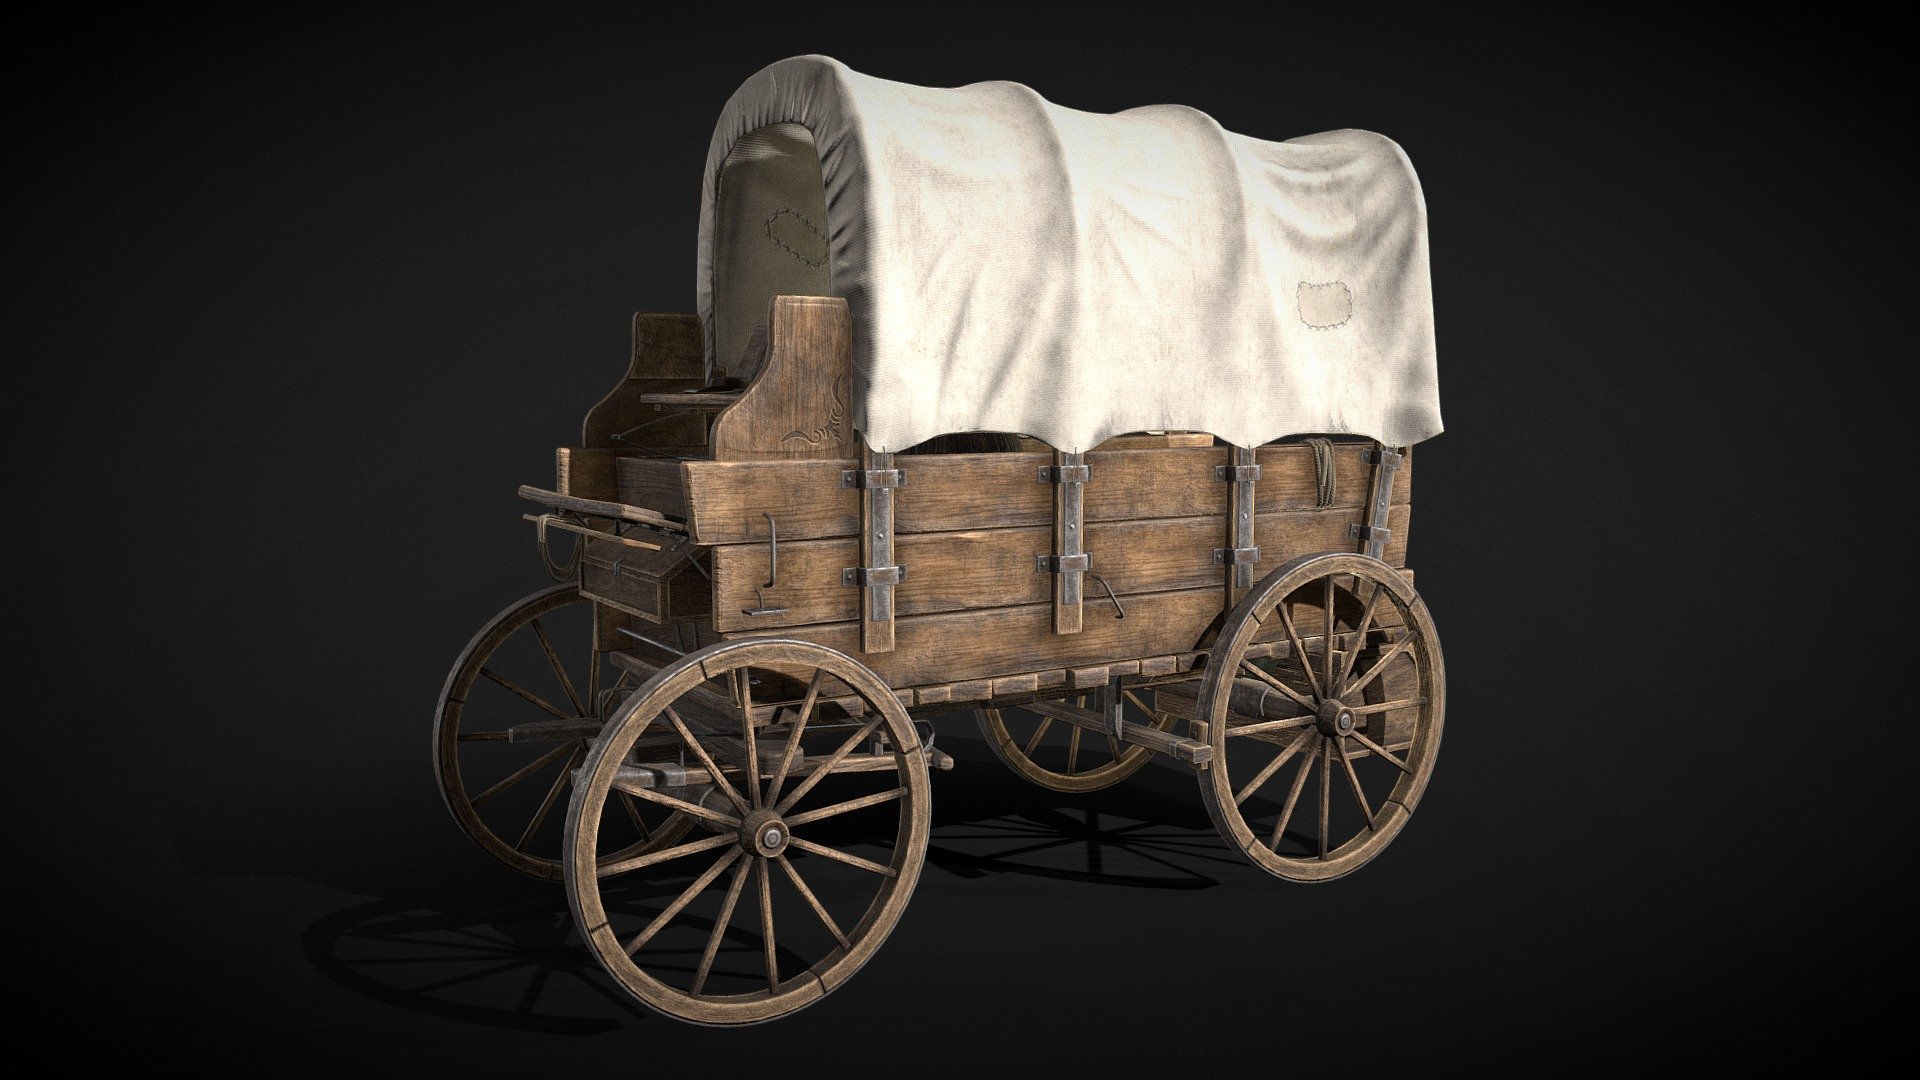 Covered wooden wagon
3 Materials
4096x4096 textures
in the car there are also different things - alcohol, a rag, boxes, a barrel. bags, ammunition, lamp 3d model